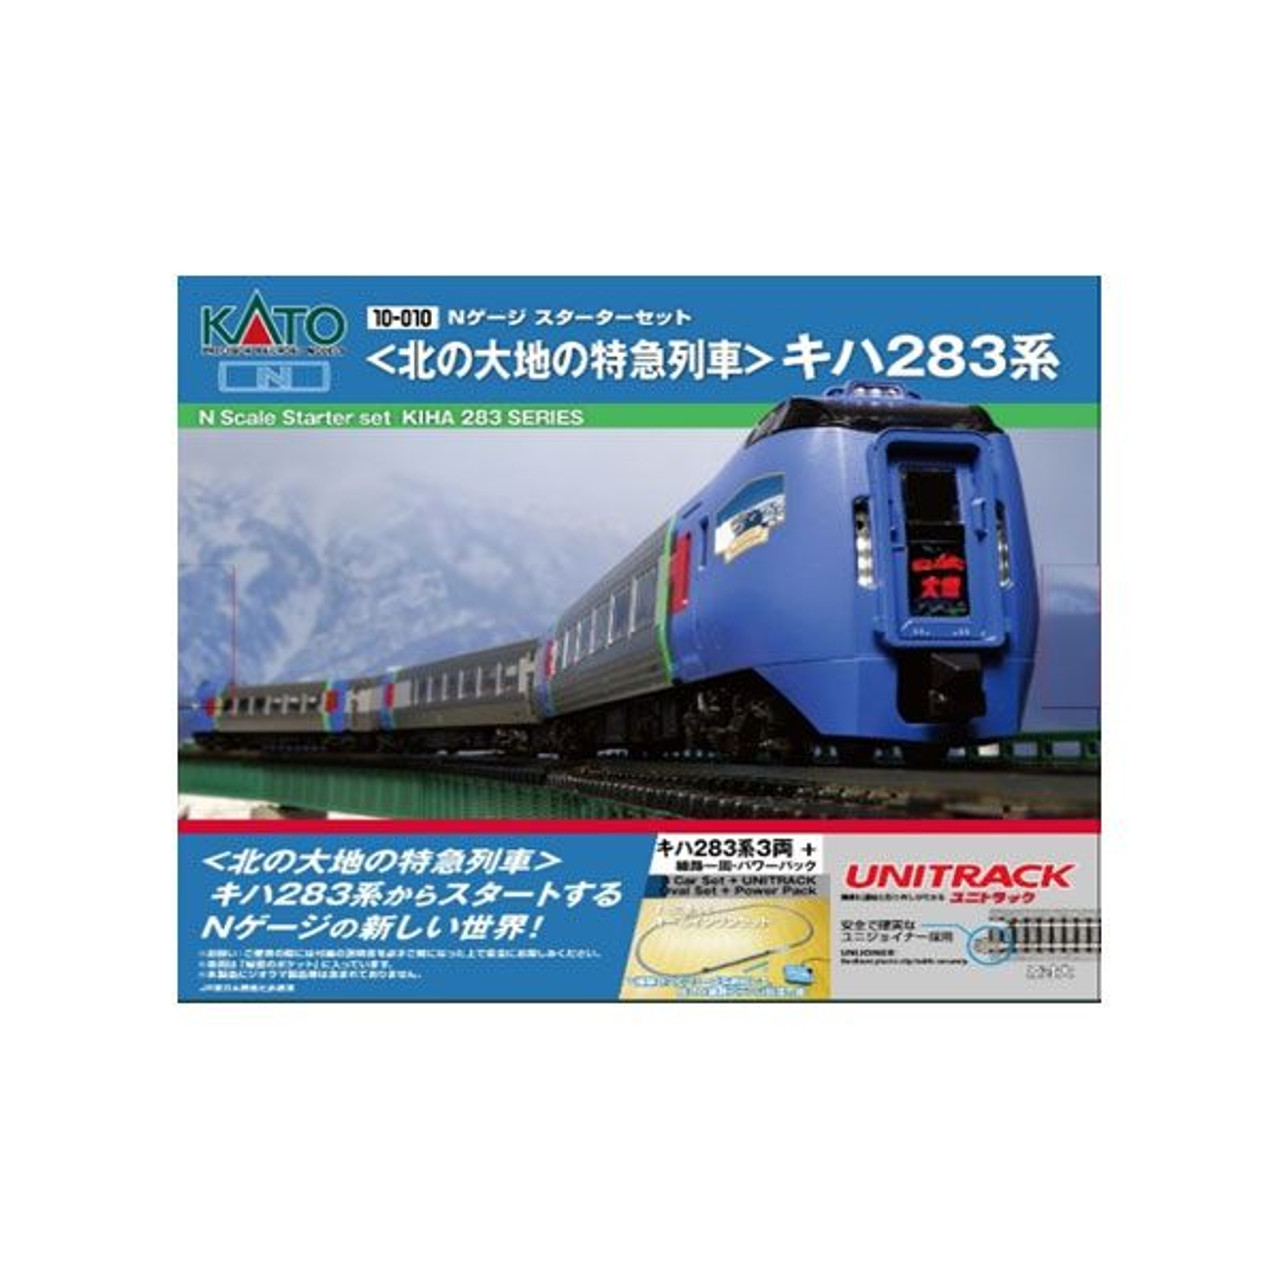 10-010 <Limited Express Train of the Northern Lands> Series KIHA 